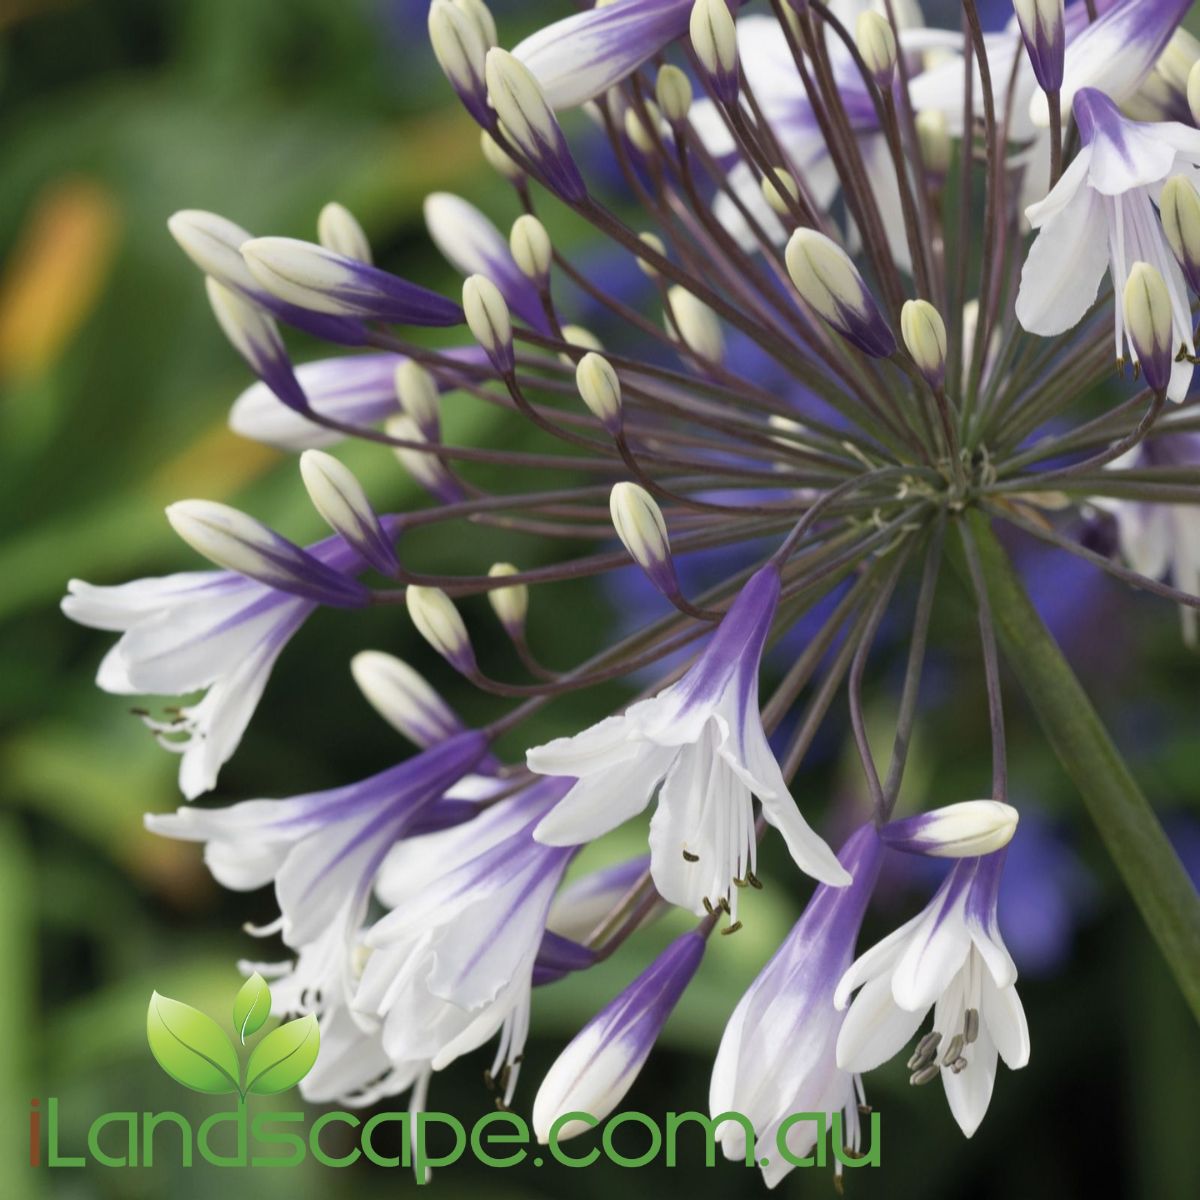 Agapanthus Fireworks is a compact agapanthus that produces densely packed trumpet shaped flowers that transition from dark, violet blue  throats to pure white petals